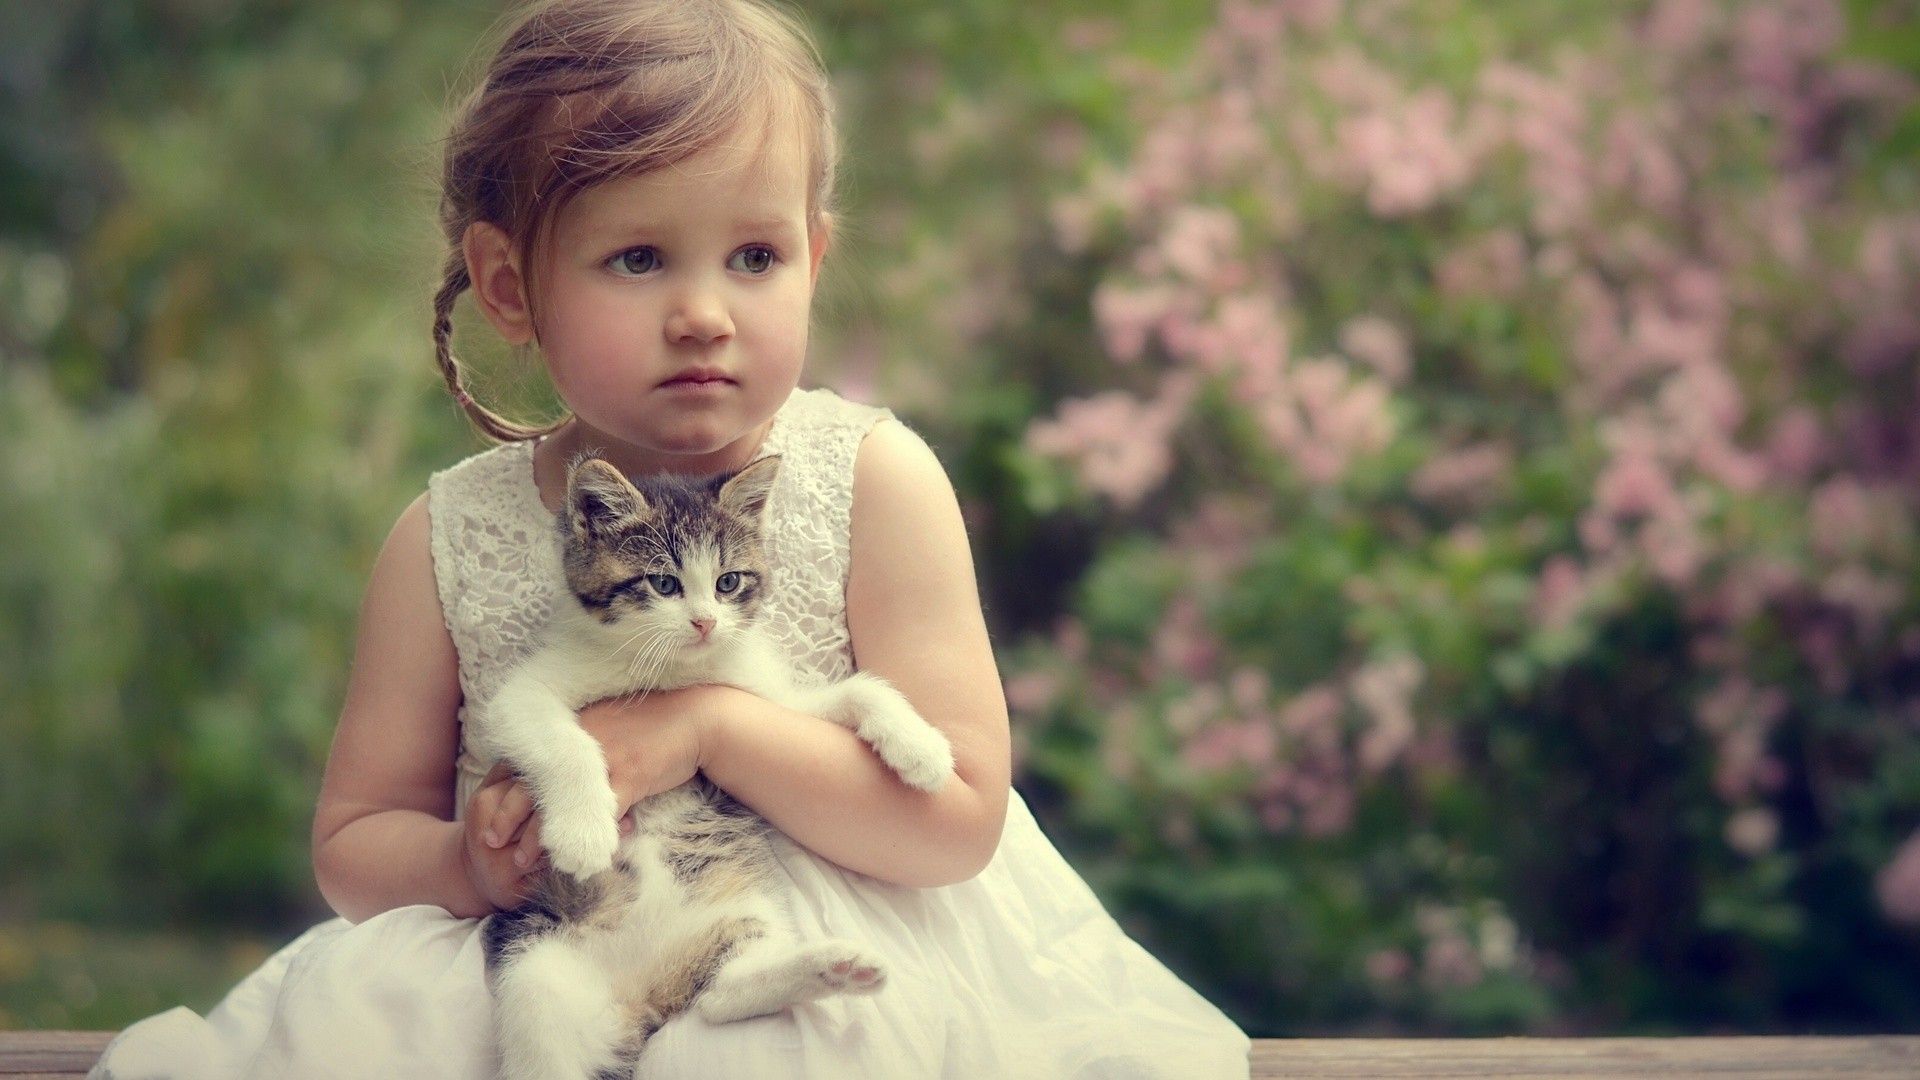 Animated HD Cute Baby Girl And Kiccen Wallpape. #1053 | wallpaperwide